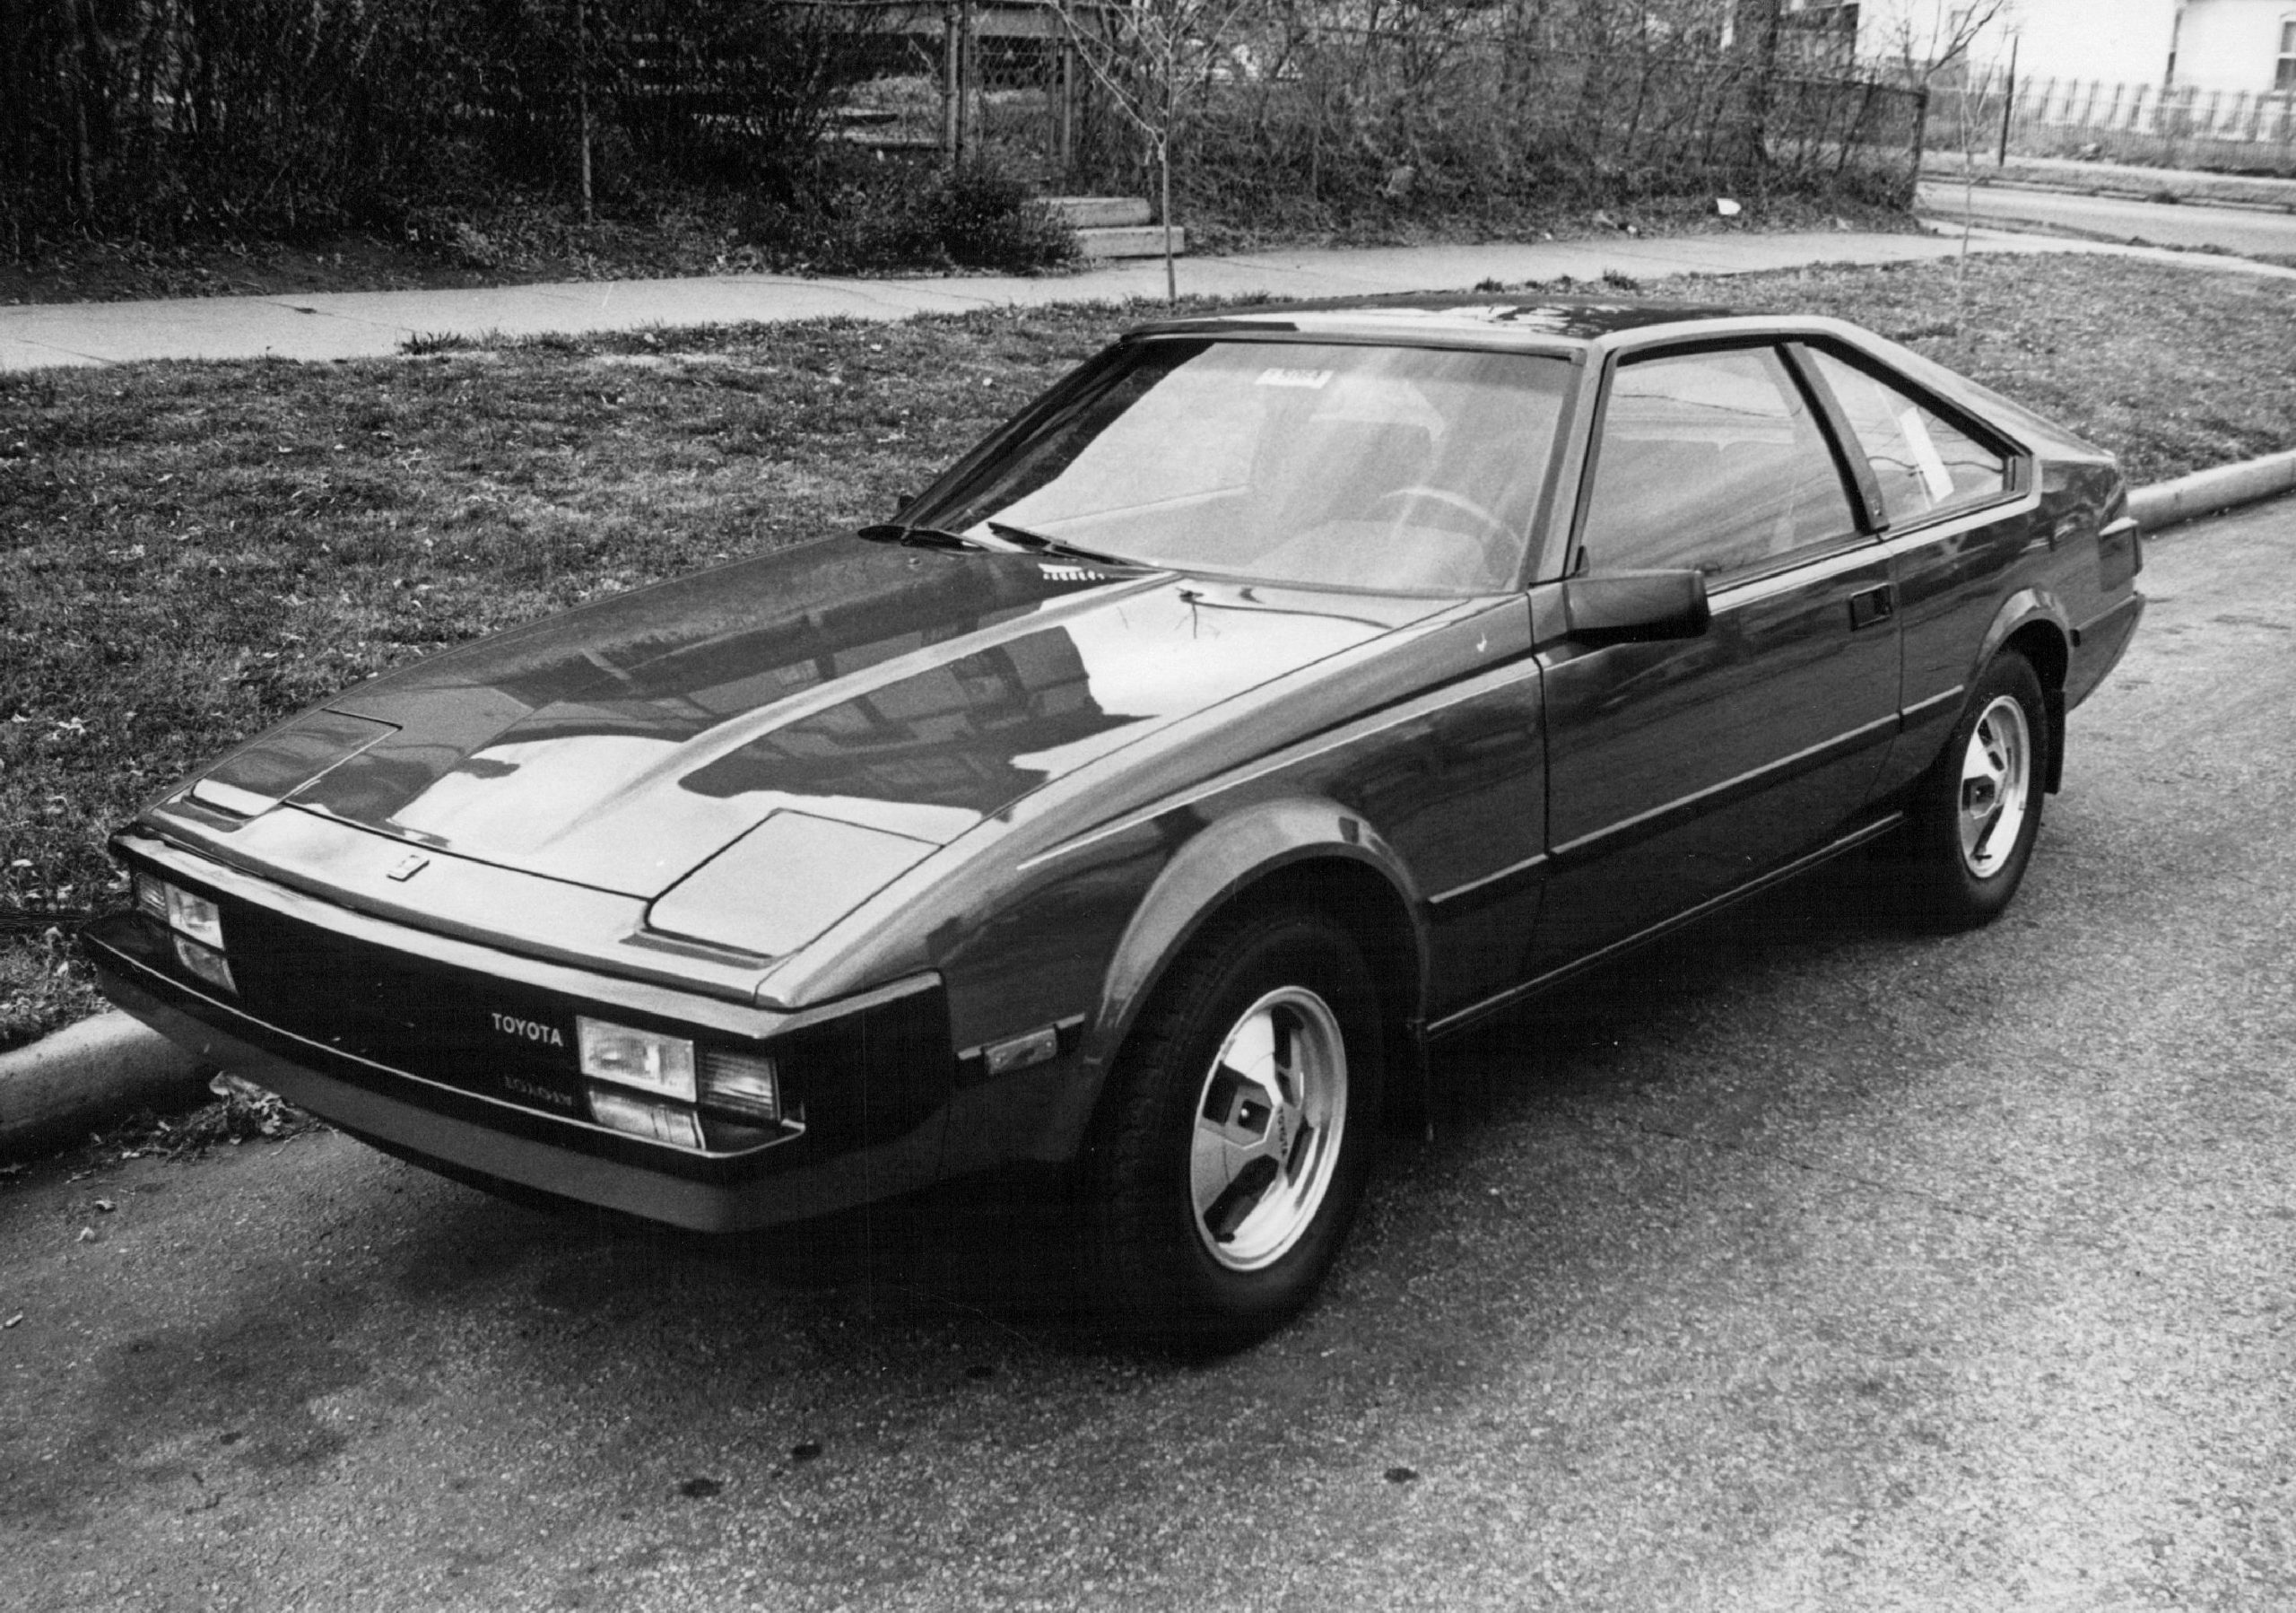 An 1982 Toyota Supra in an old black and white photo. This is a perfect example of a fun and affordable used car with a manual transmission